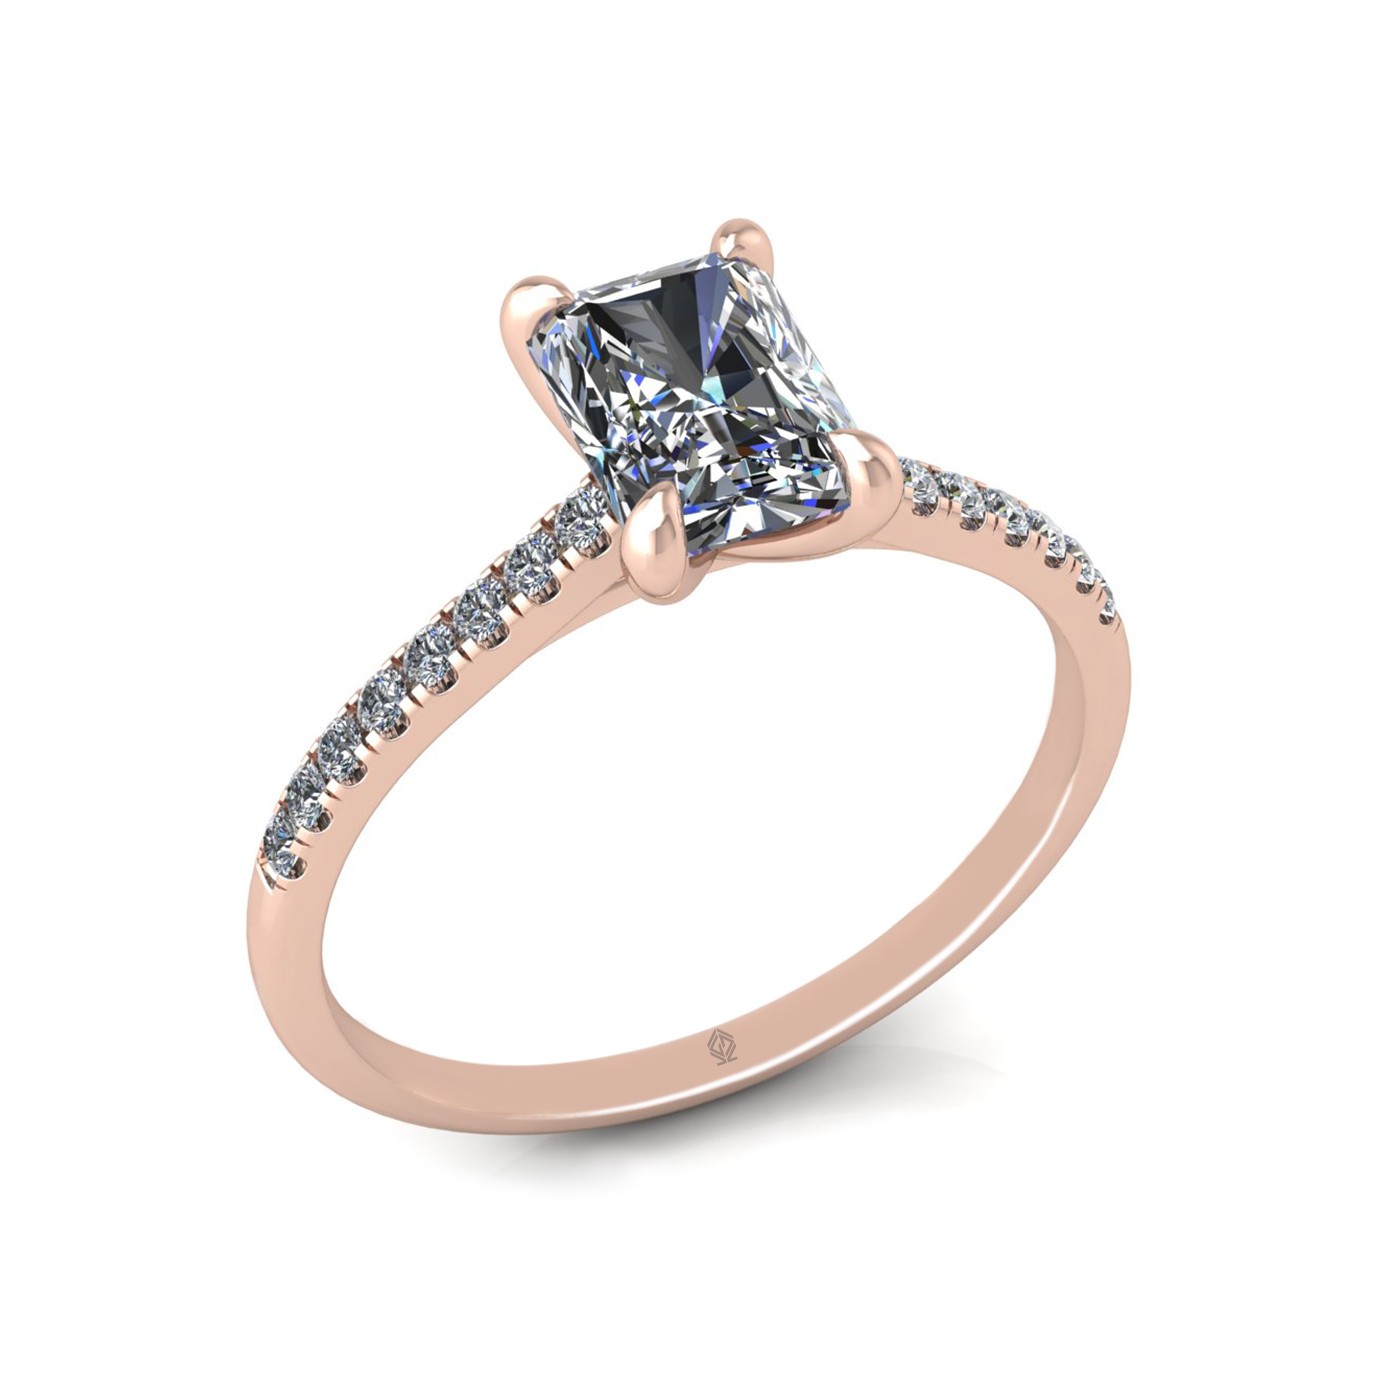 18k rose gold  1,20 ct 4 prongs radiant cut diamond engagement ring with whisper thin pavÉ set band